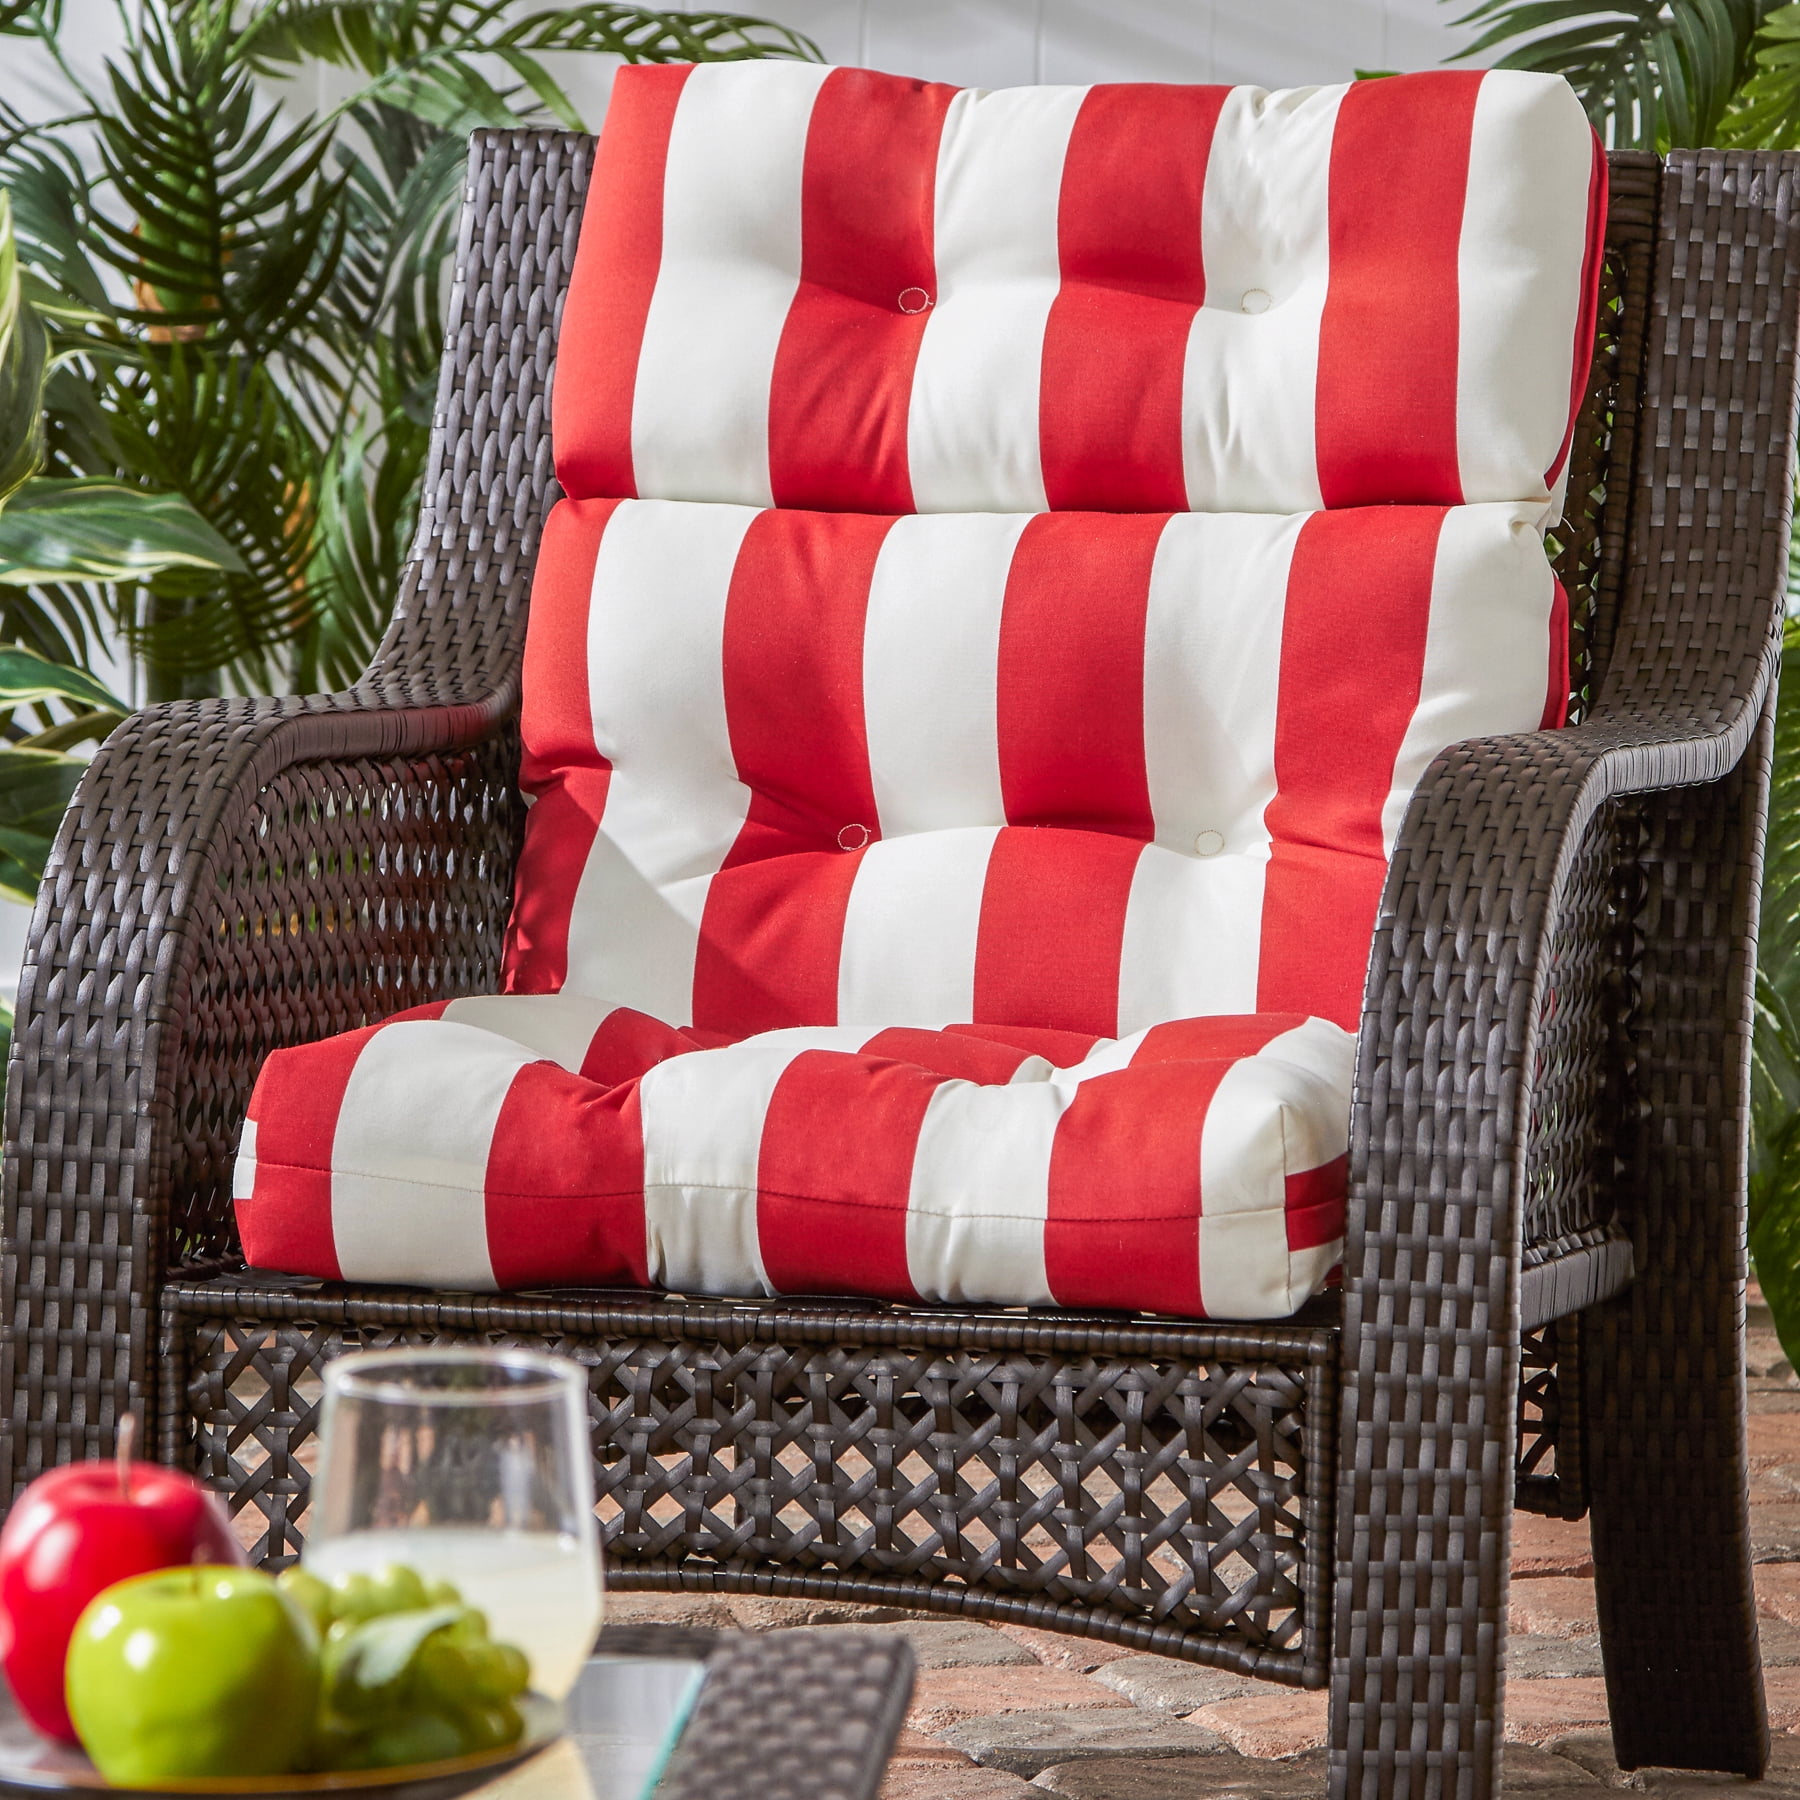 Cabana Red Stripe Outdoor High Back Chair Cushion